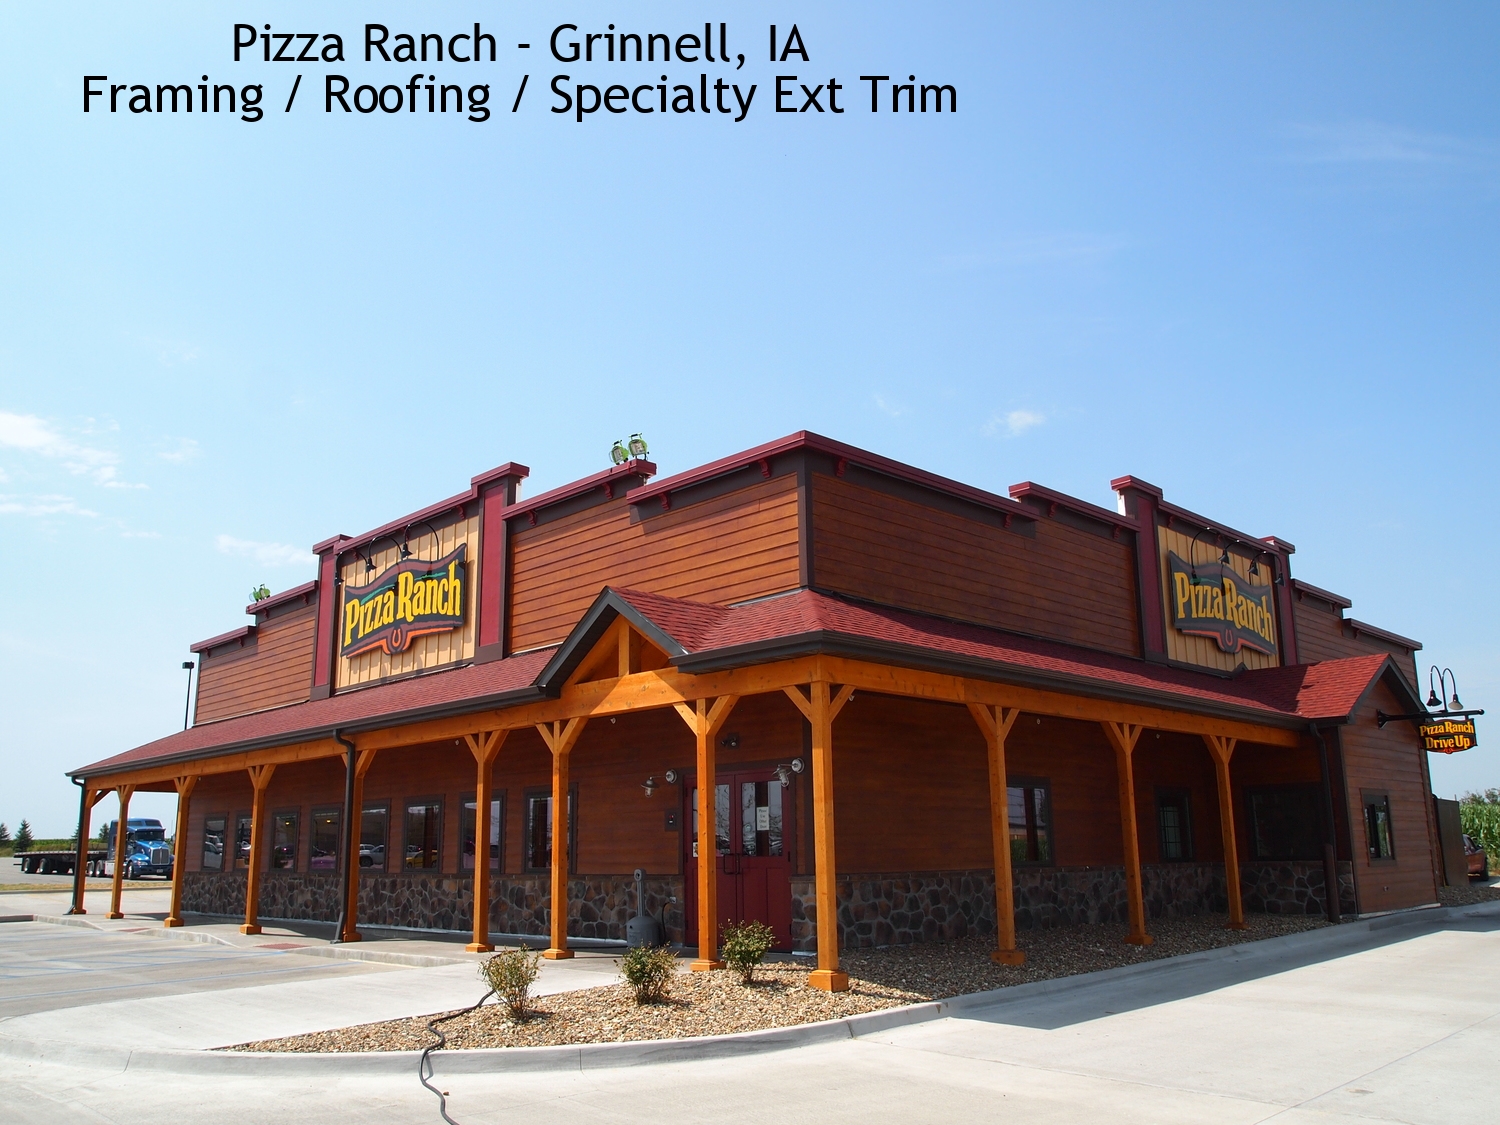 Pizza Ranch Grinnell (1).JPG